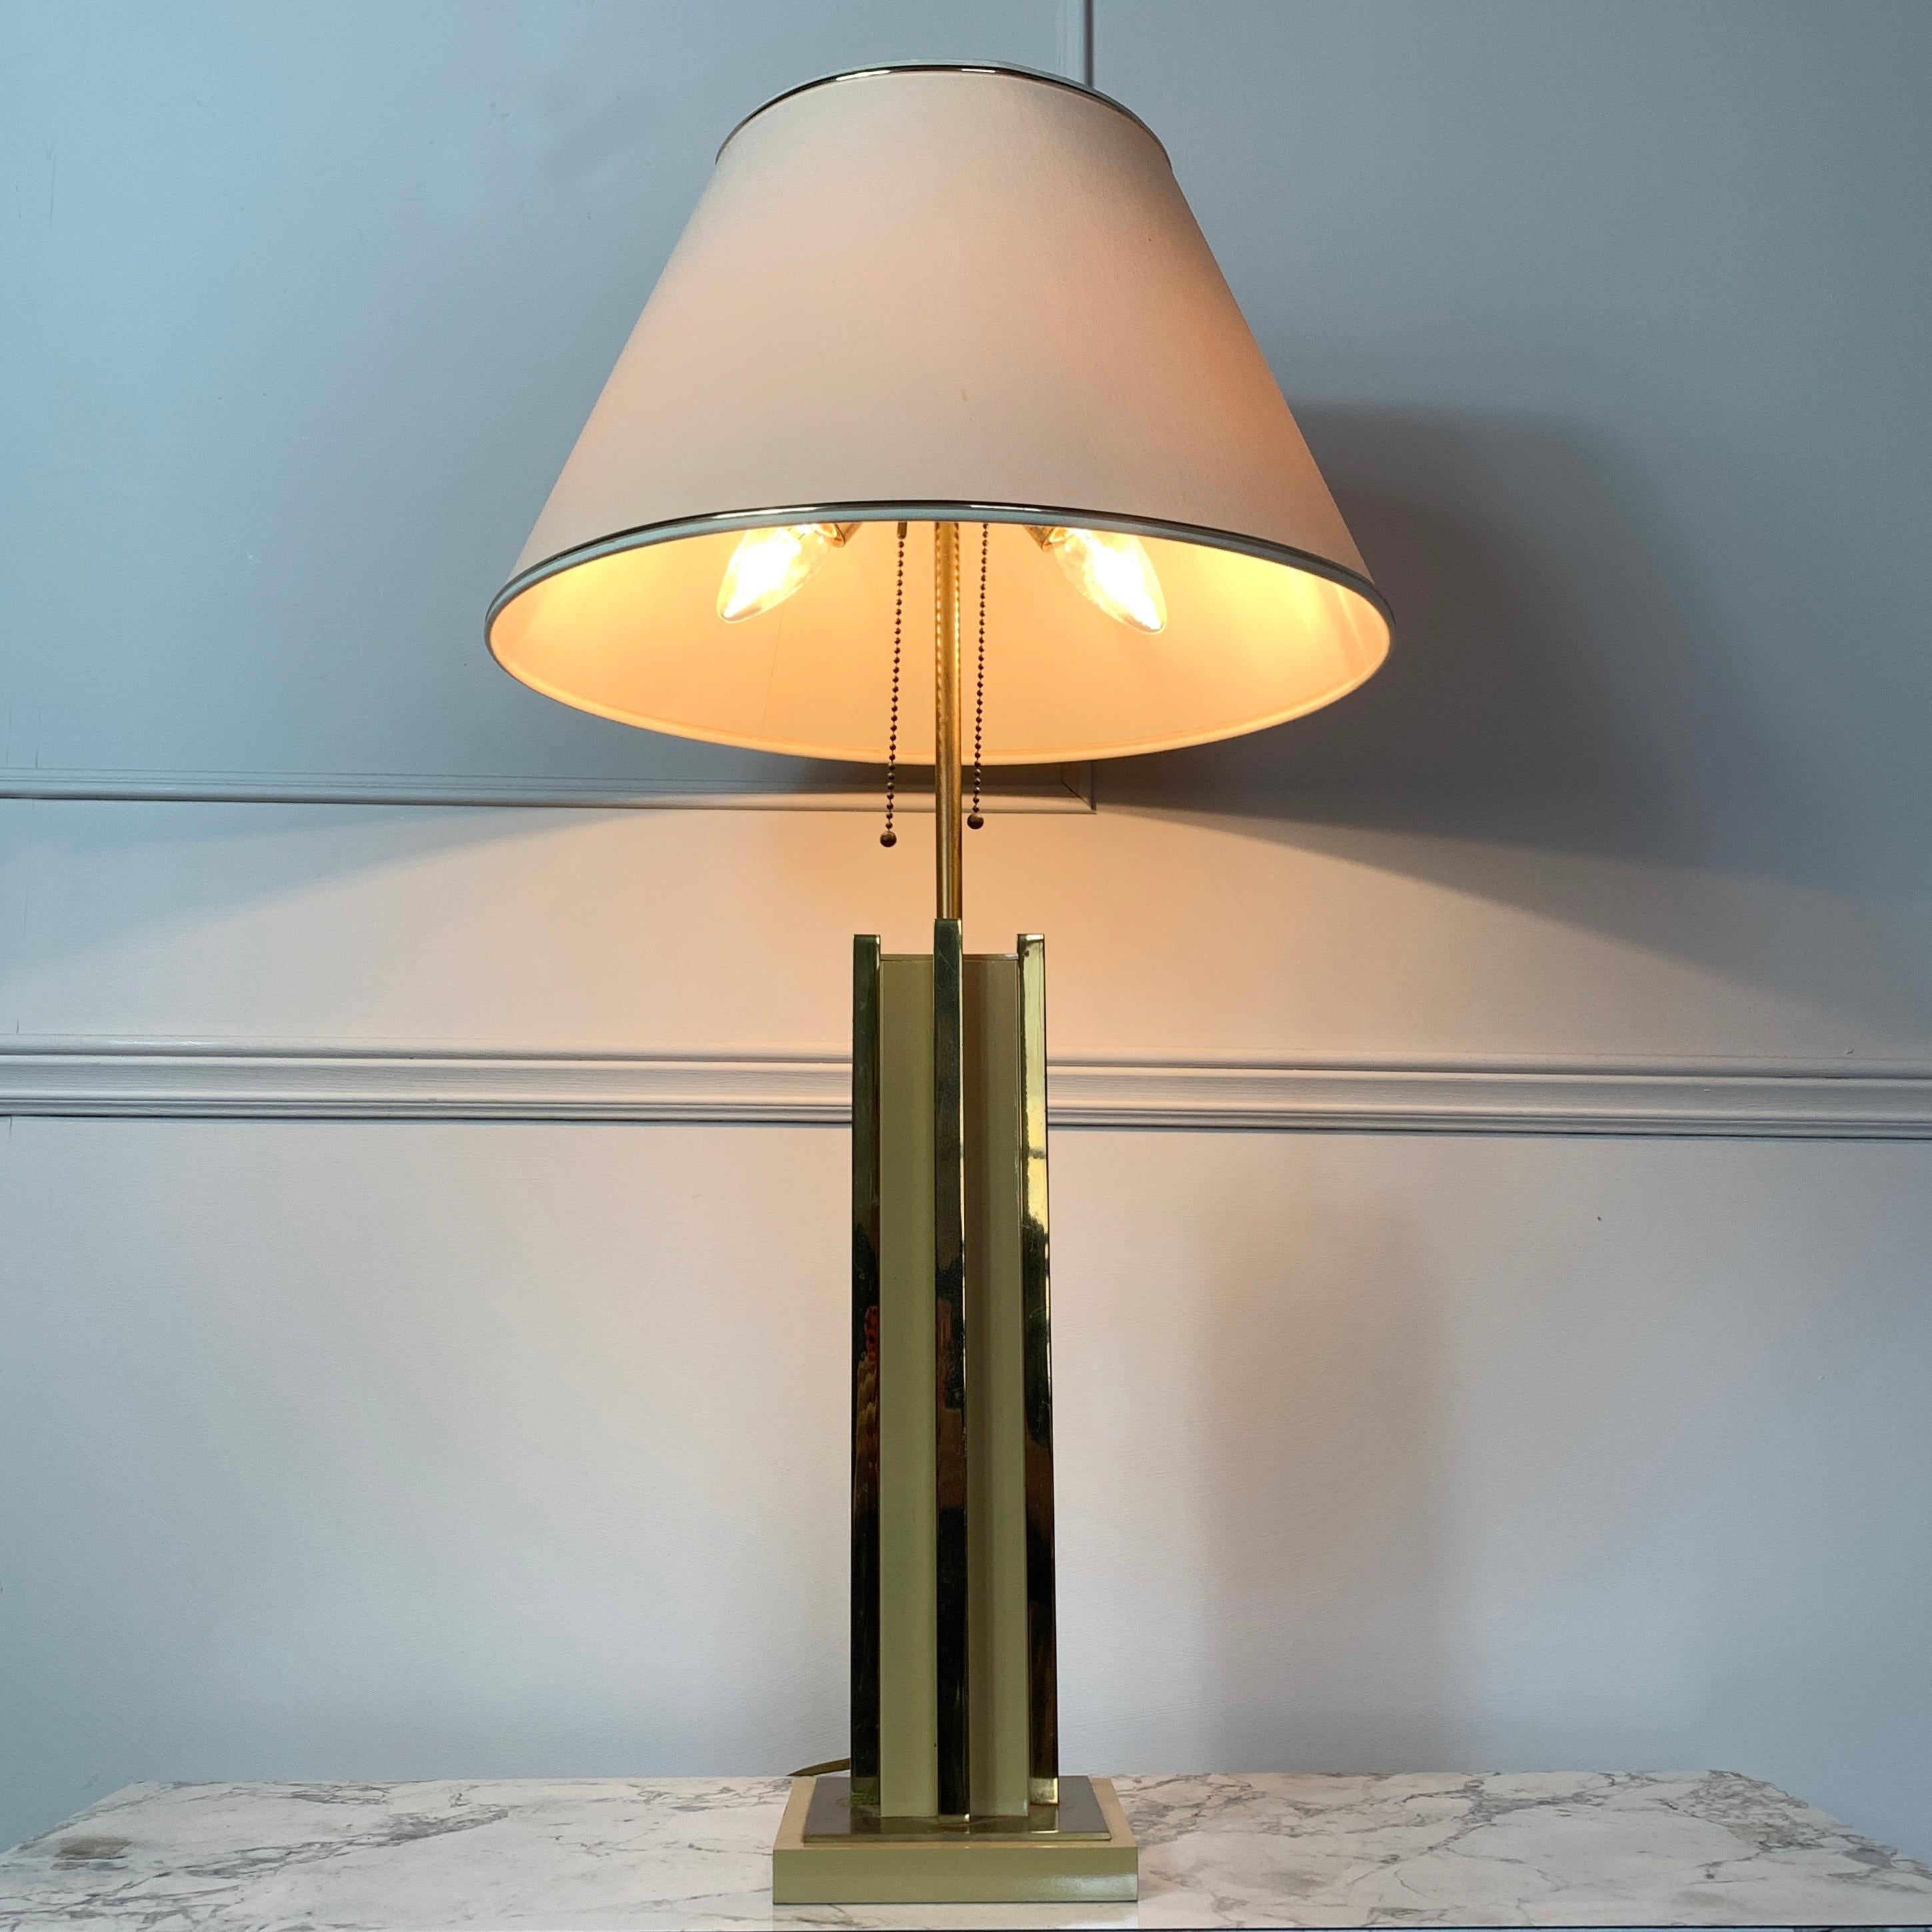 20ième siècle 1970 Willy Rizzo Attributed Gold Table Lamp (lampe de table en or) en vente